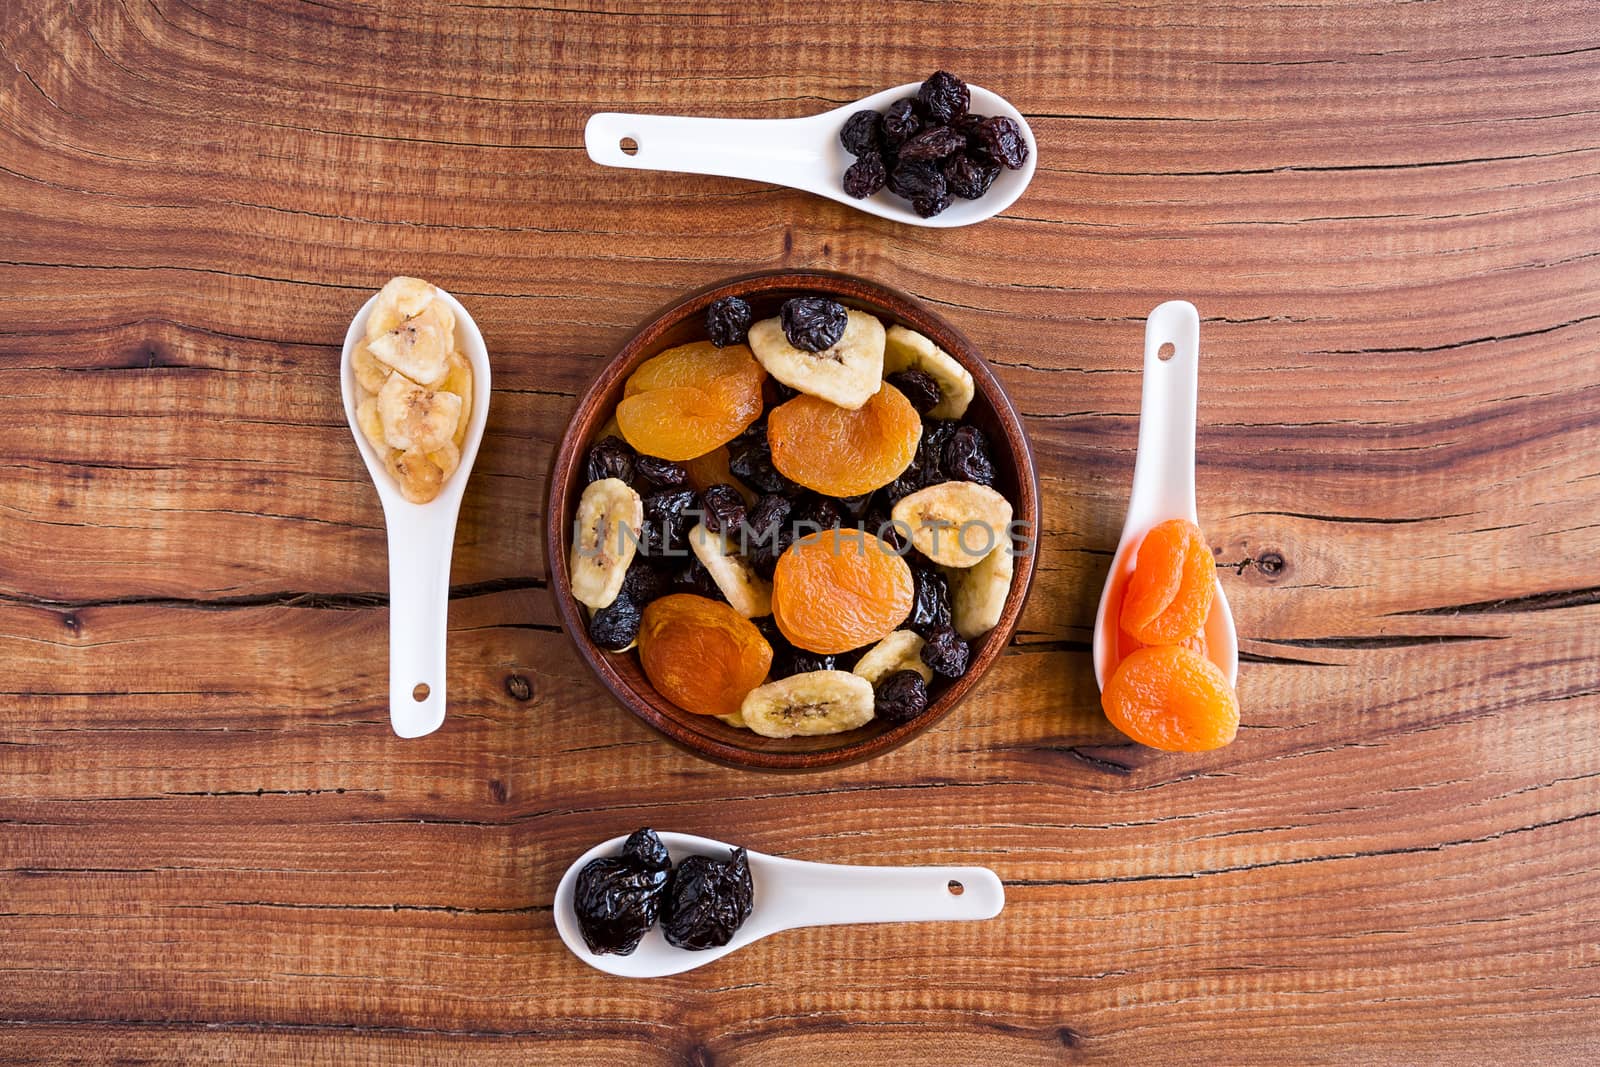 Mix of dried fruits in a wooden bowl over a rustic table seen from above